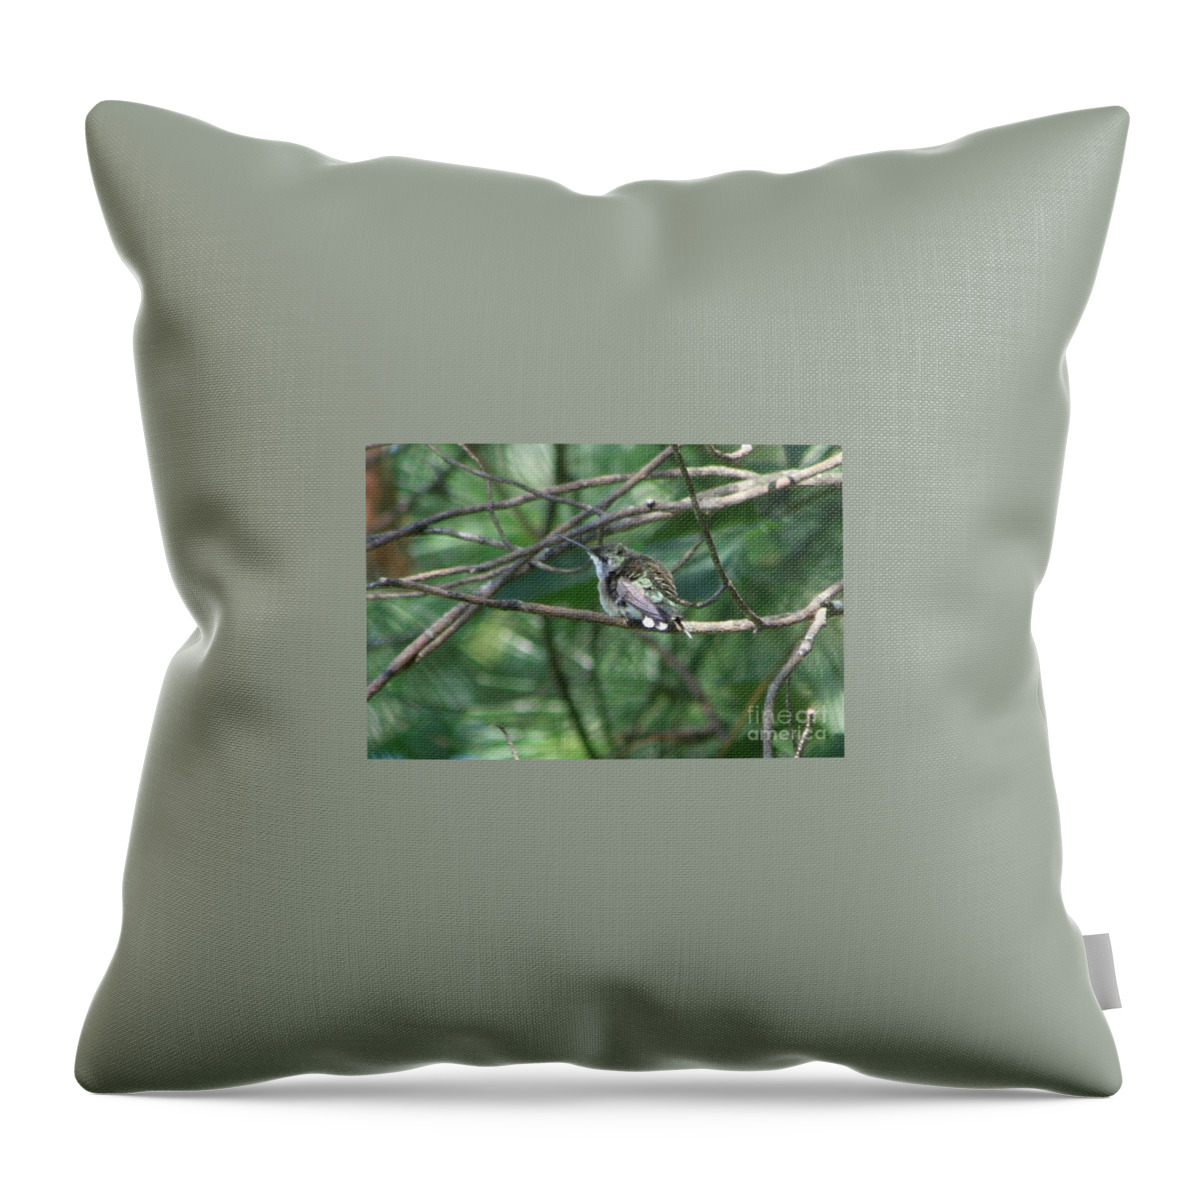 Hummingbird Throw Pillow featuring the photograph Chubby by Barbara S Nickerson